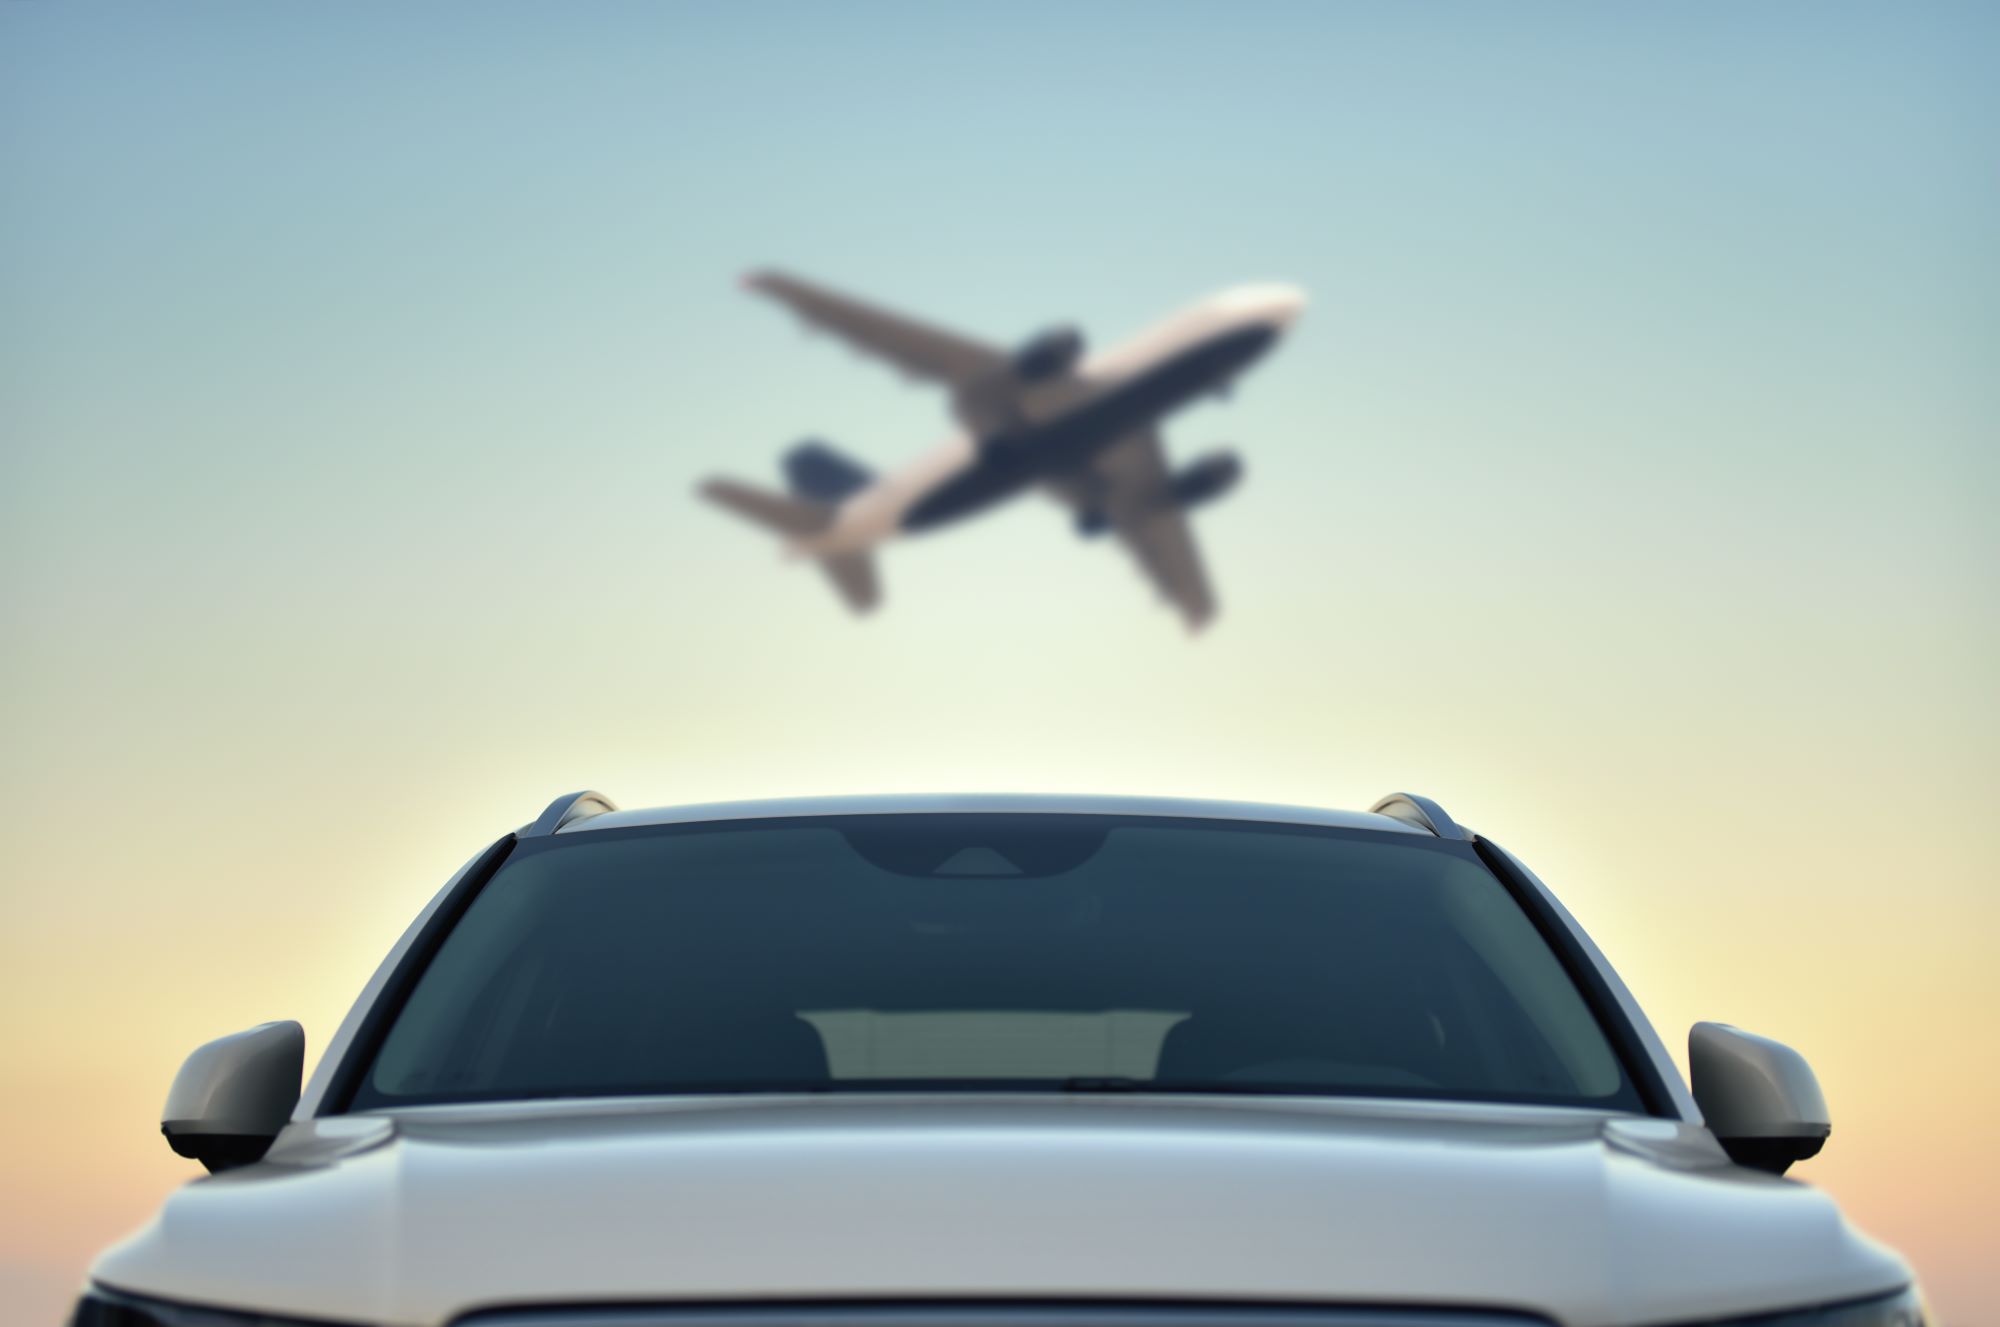 Short-Term Airport Parking vs. Drop-Off: Which is the Better Option?